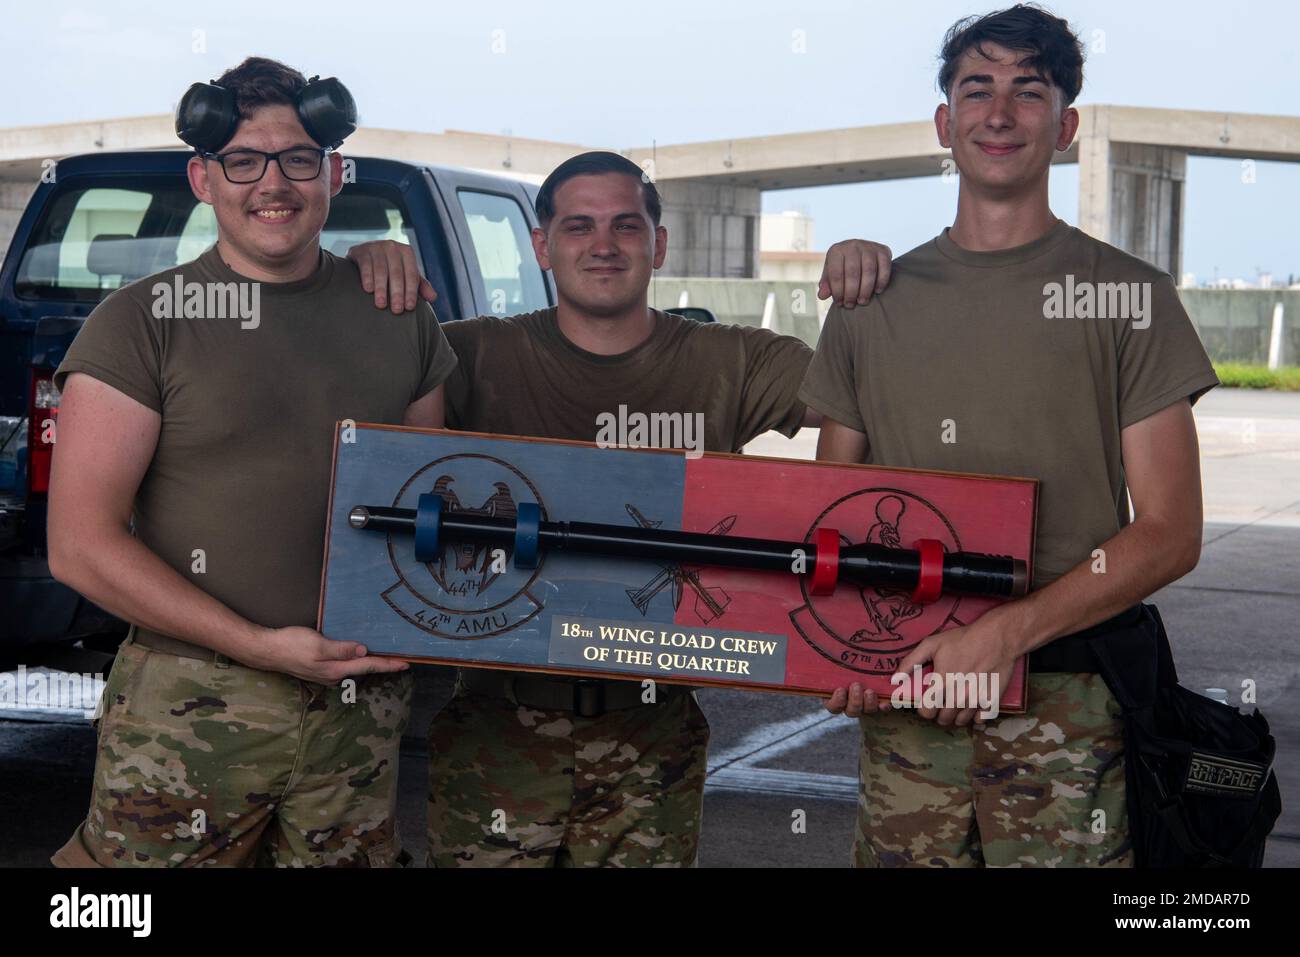 Airman 1st Class David Somers, 44th Aircraft Maintenance weapons load crew team member, left, Staff Sgt. Gabriel Gomez, 44th AMU weapons load crew team chief, center, and Airman 1st Class Jacob Herald, 44th AMU weapons load crew team member, right, pose with the trophy after winning the F-15 Load Crew of the Quarter Competition at Kadena Air Base, Japan, July 15, 2022. The friendly competition emphasizes fostering teamwork, knowledge proficiency, technical ability and performance. Stock Photo